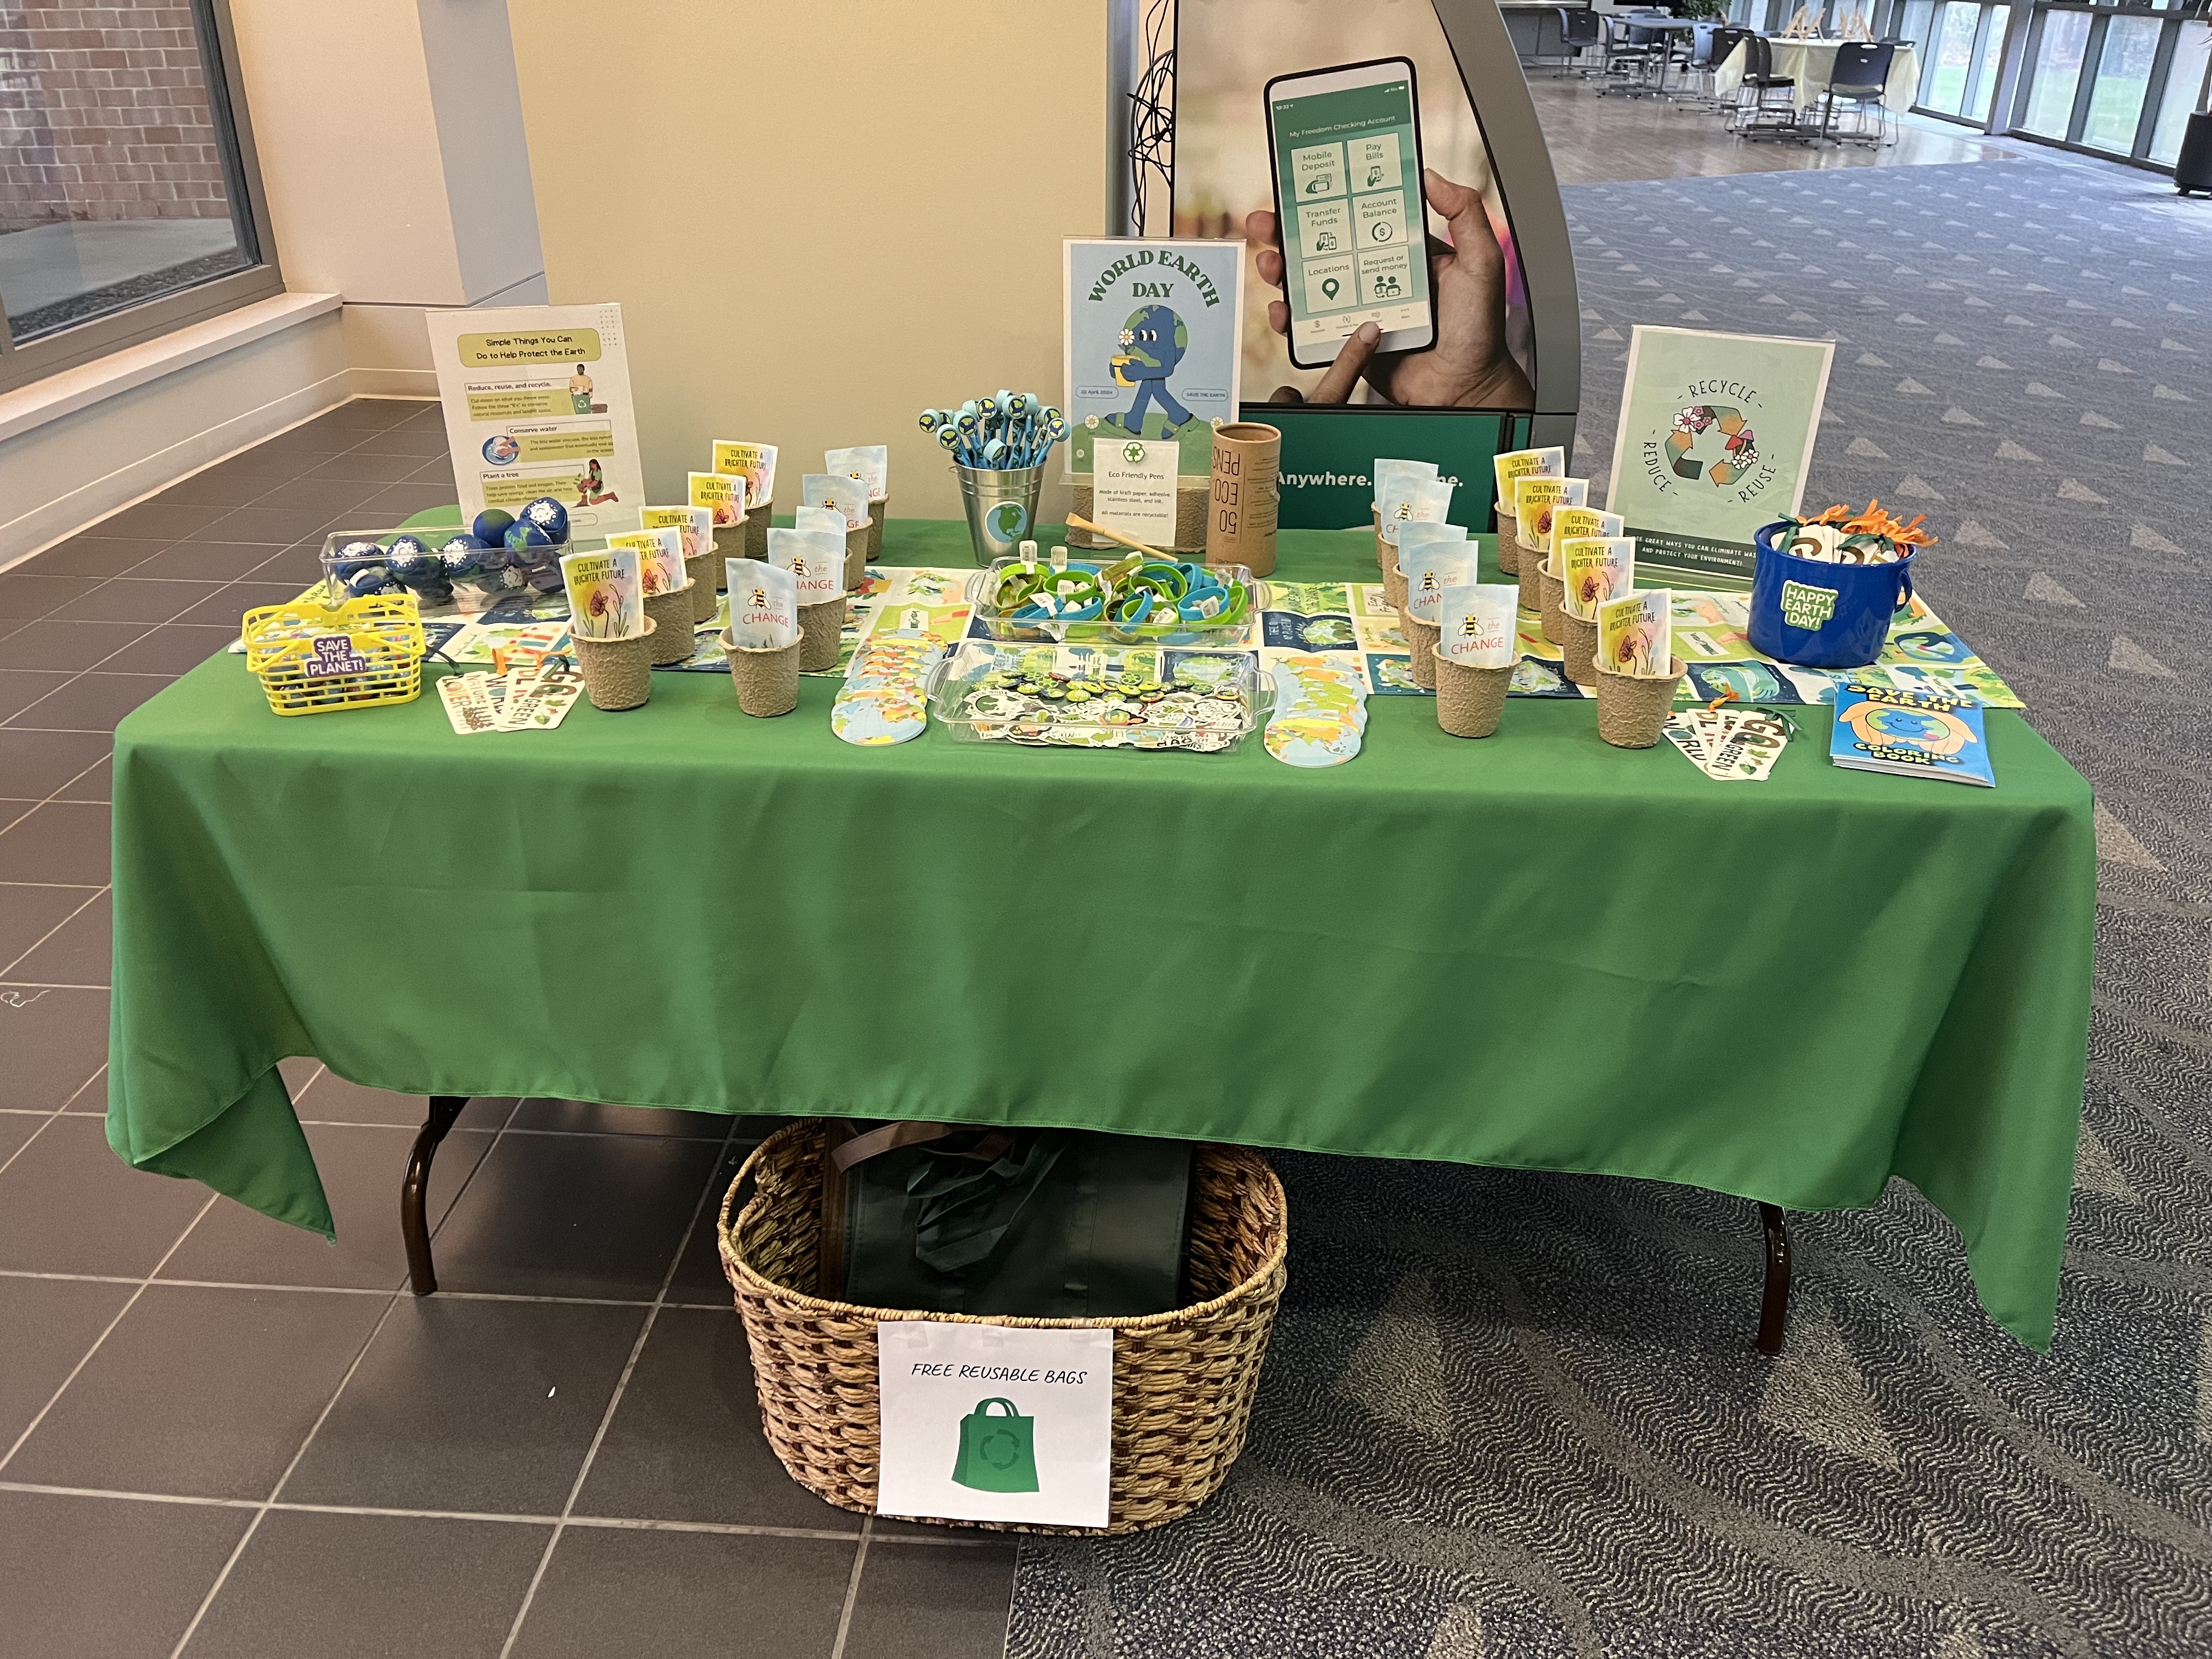 Earth Day information table at the Cape May campus